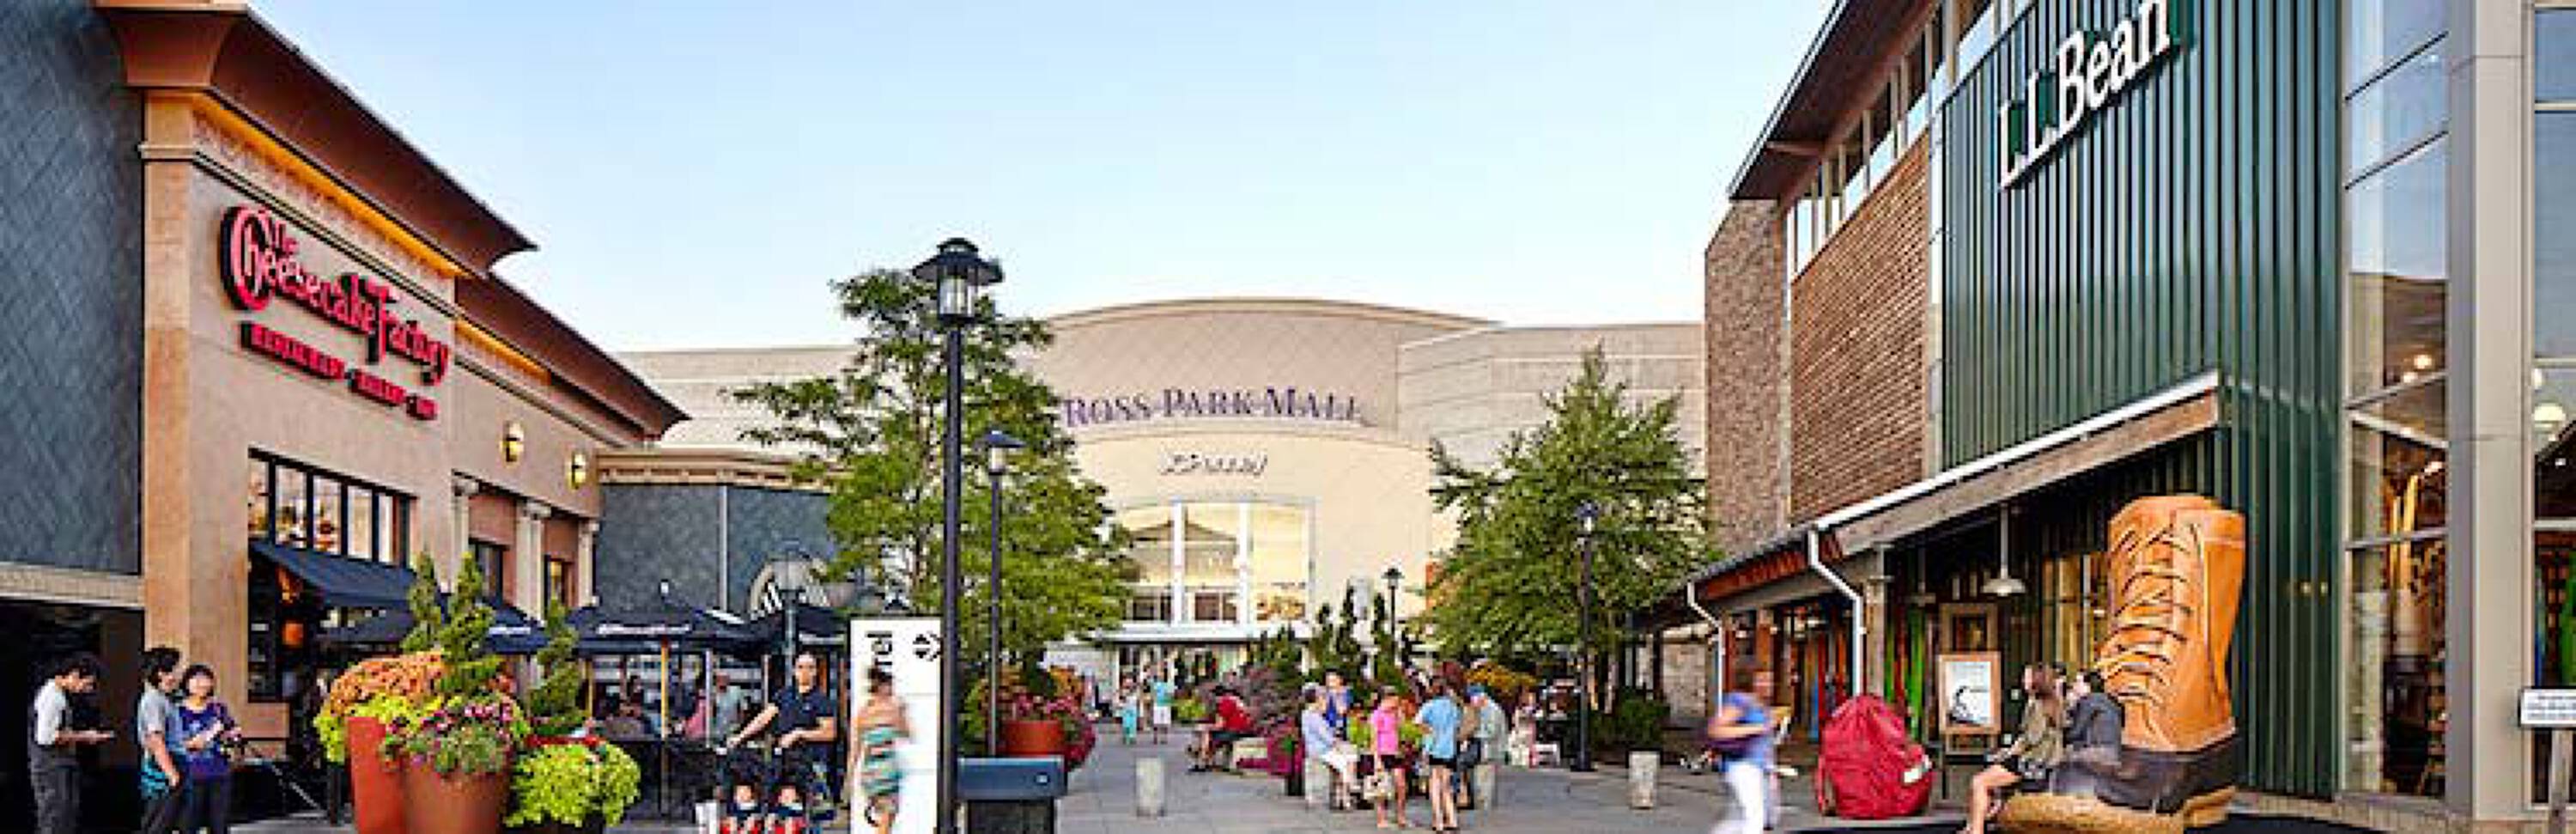 Ross Park Mall, Pittsburgh